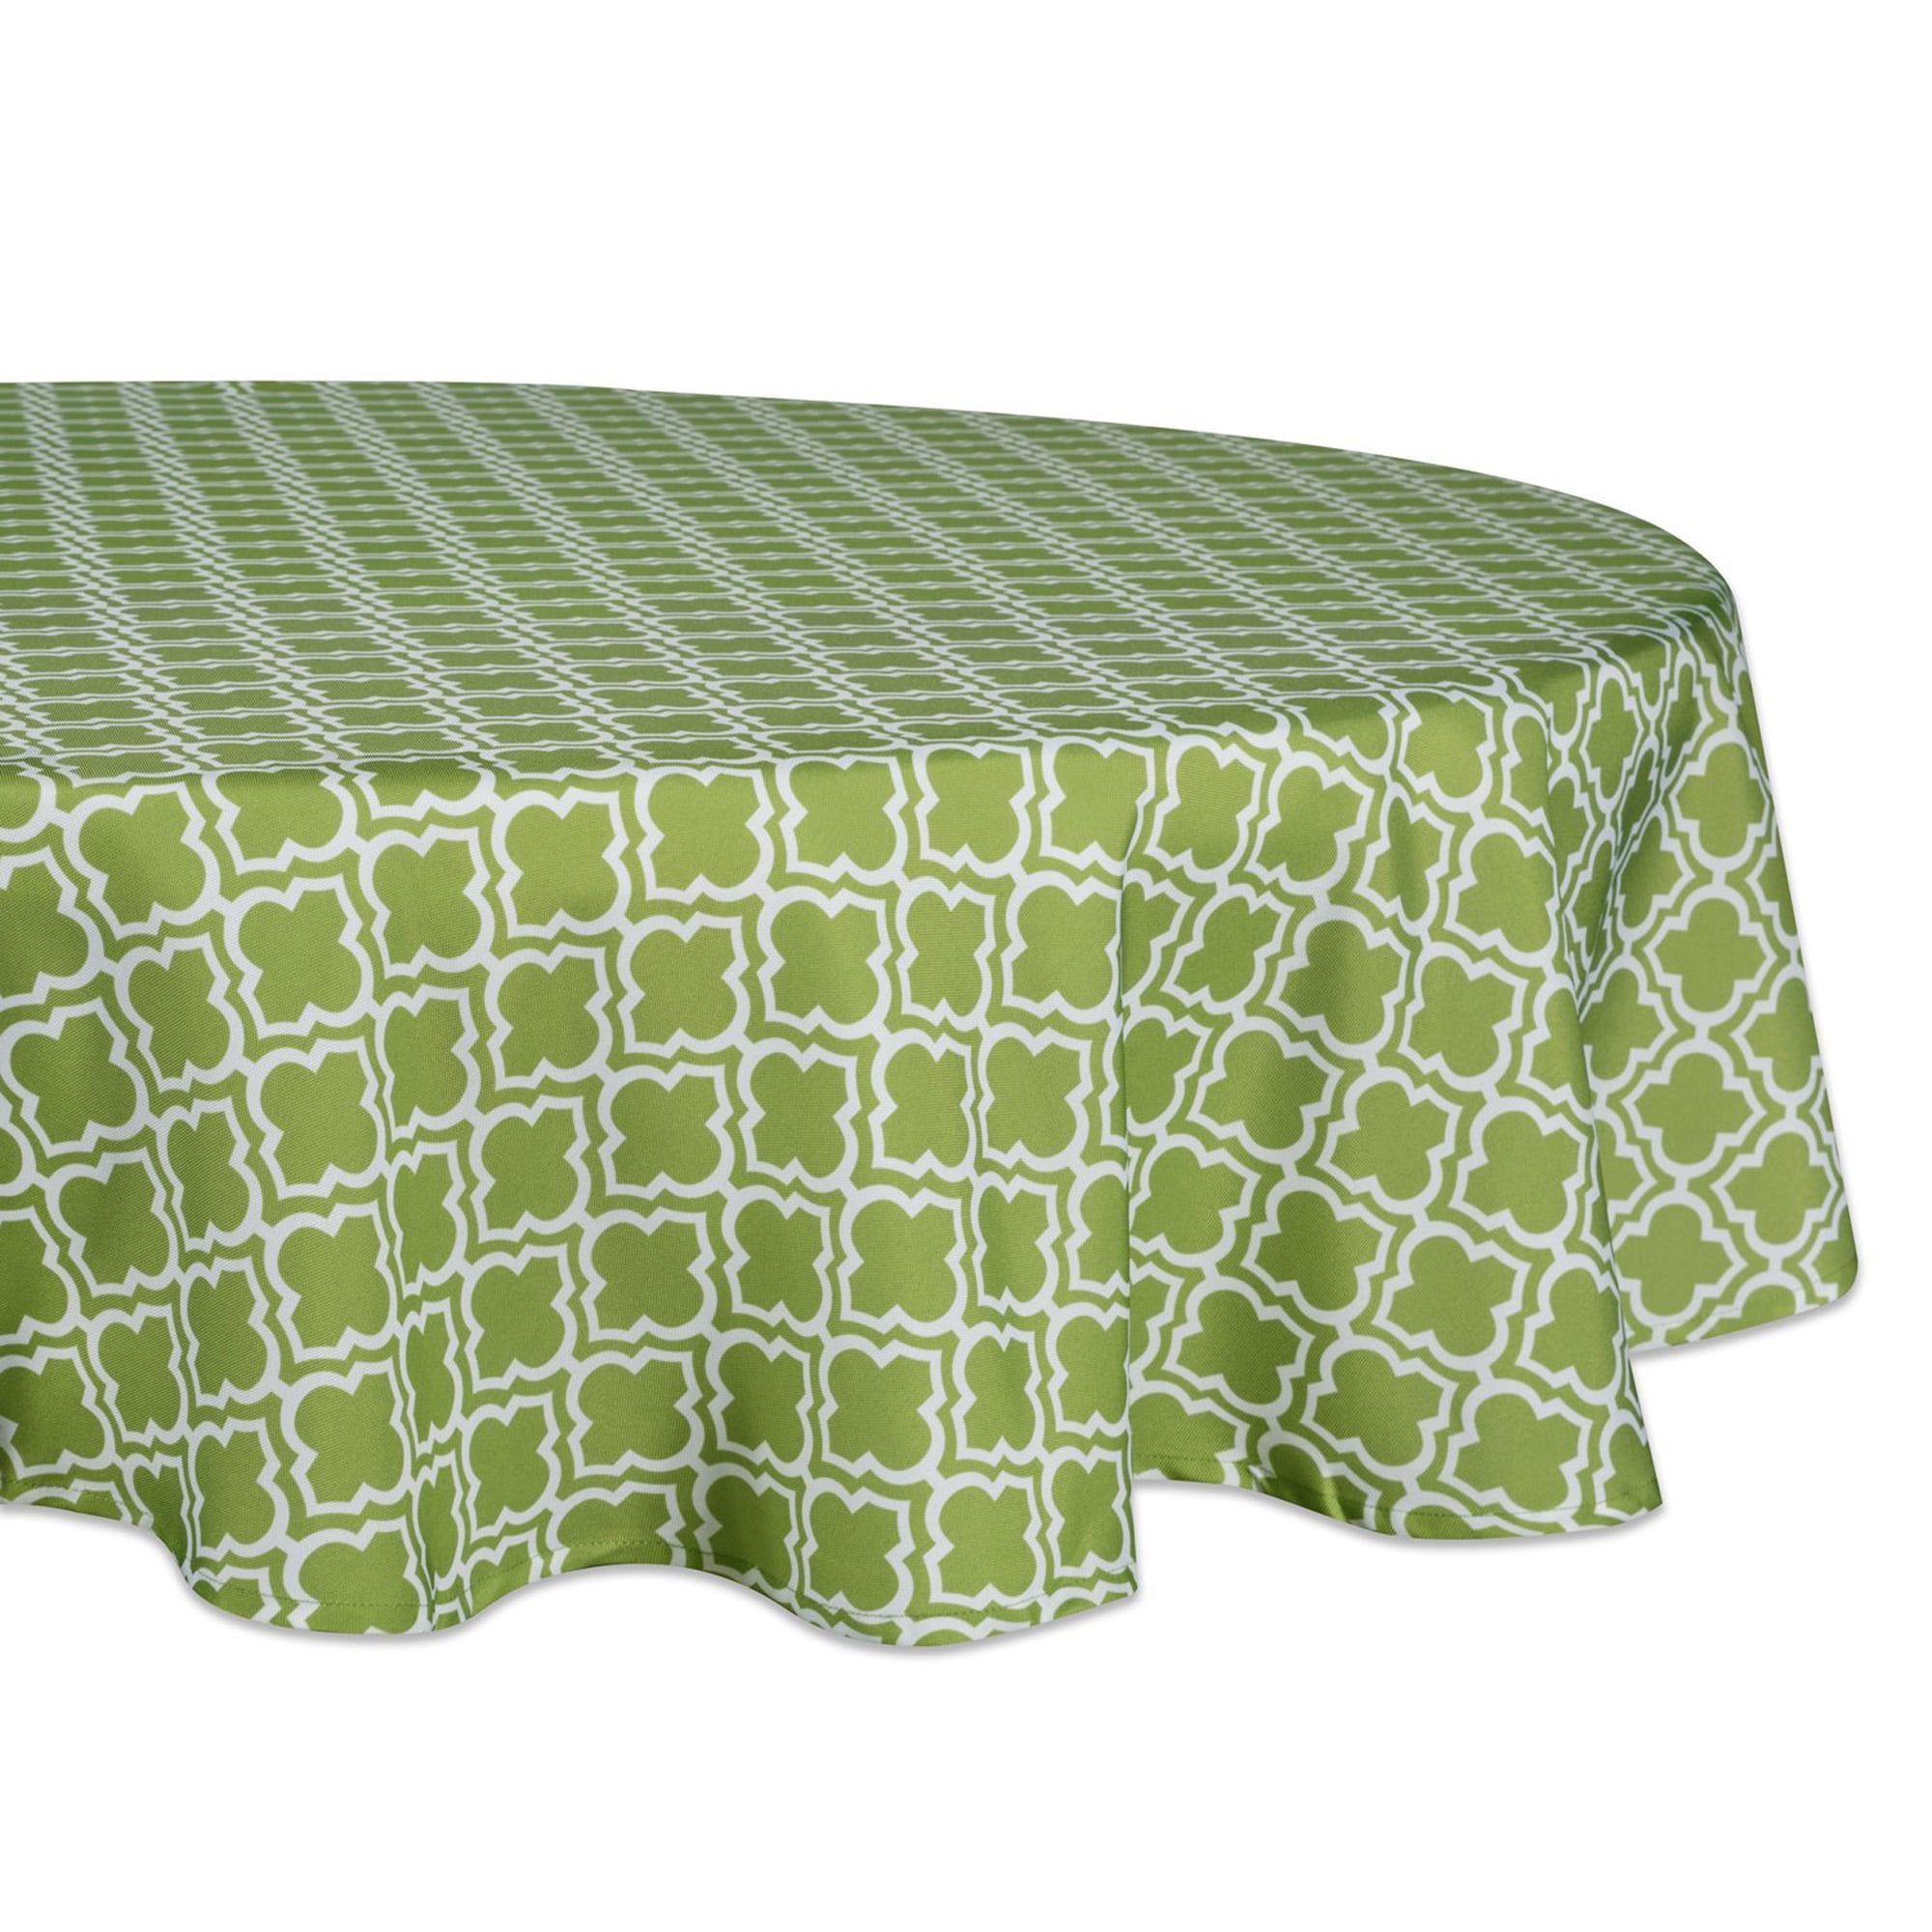 NEW Spring Jubilee Plaid Gingham Multicolor Tablecloth Pick Size 